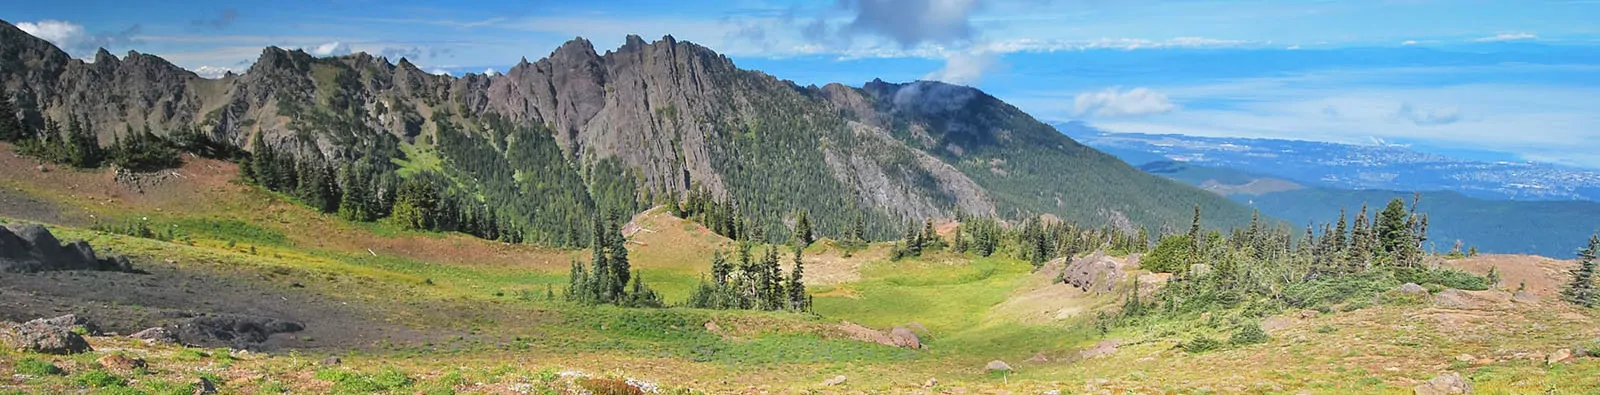 Olympic National park